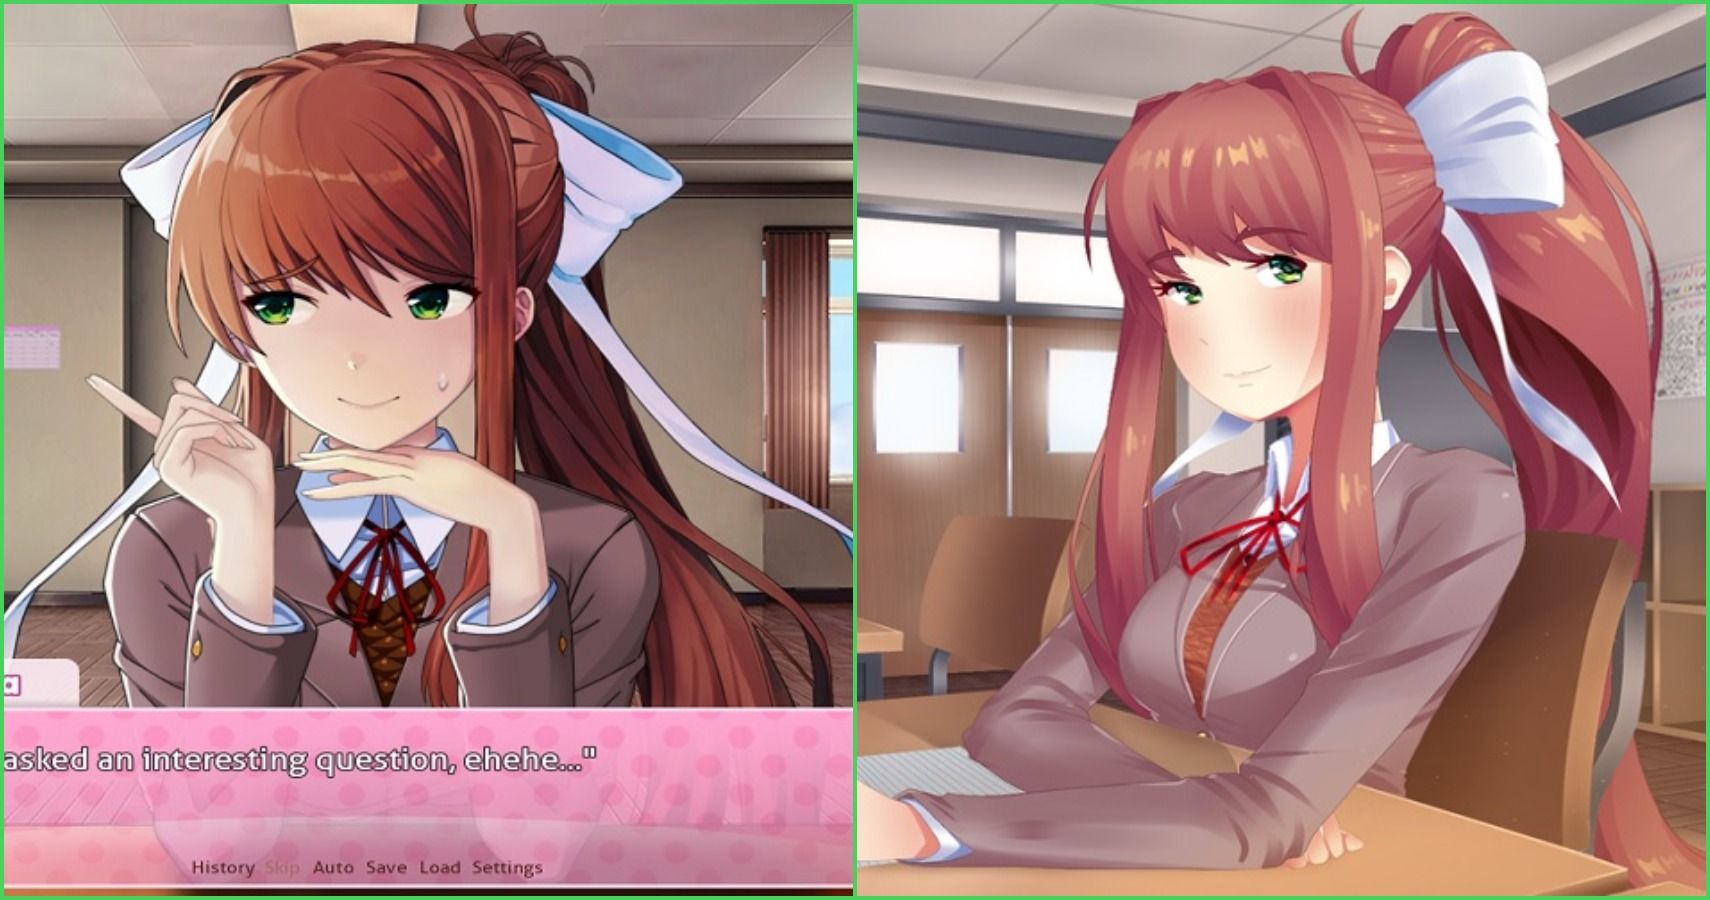 If you've played doki doki monika after story, you will understand